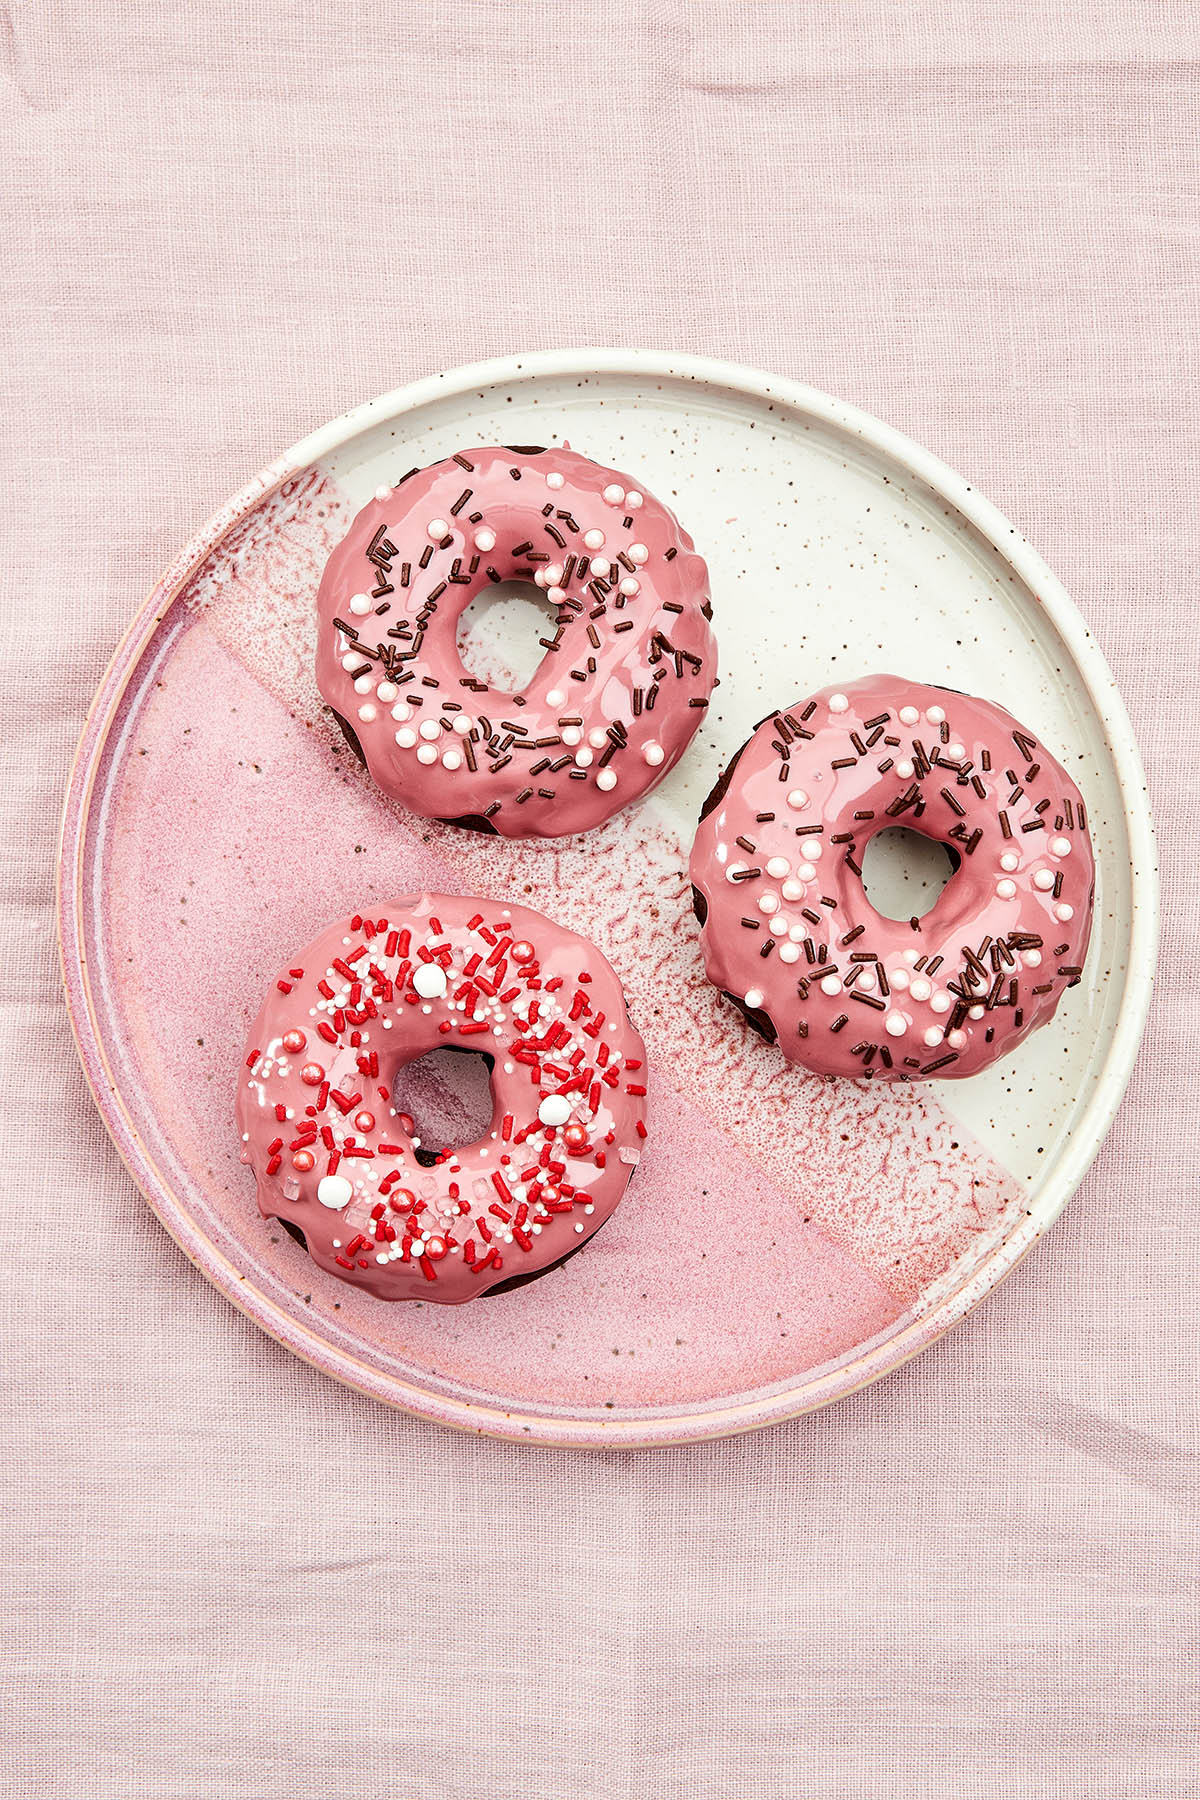 Three chocolate sprinkle donuts on a pink plate.